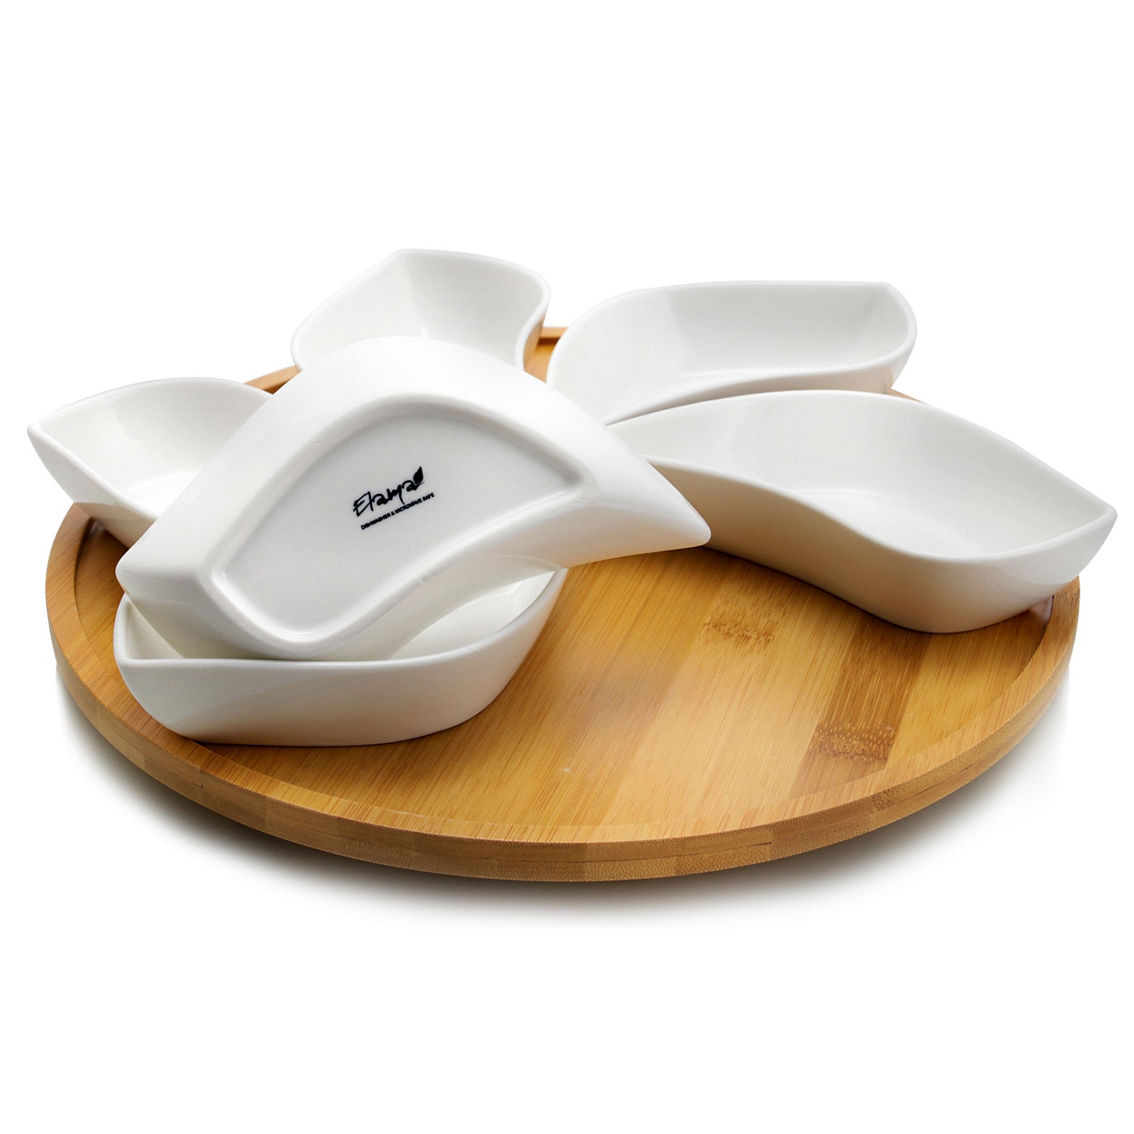 Elama Signature Modern 13.5 Inch 7pc Lazy Susan Appetizer and Condiment Server S - Image 2 of 4